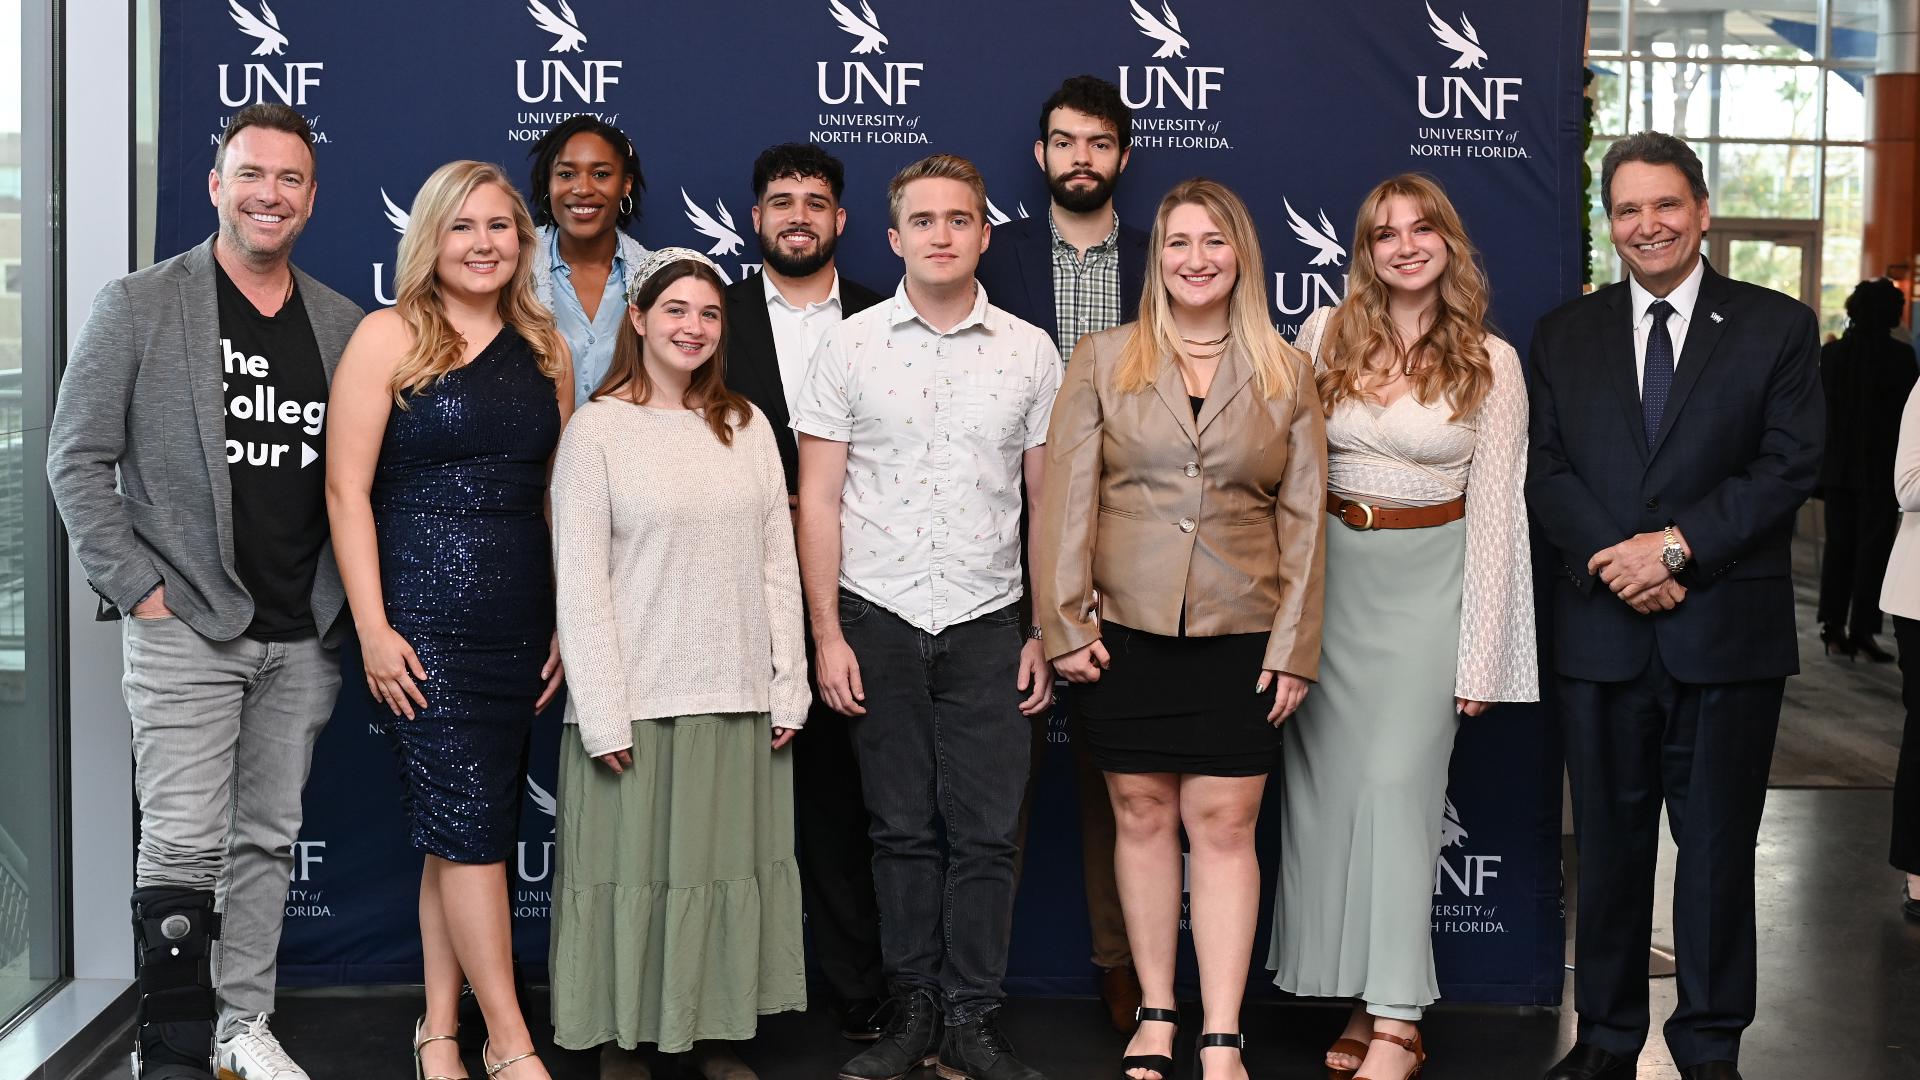 Students attending the University of North Florida were in the spotlight for a new episode of the Amazon Prime Video series "The College Tour."